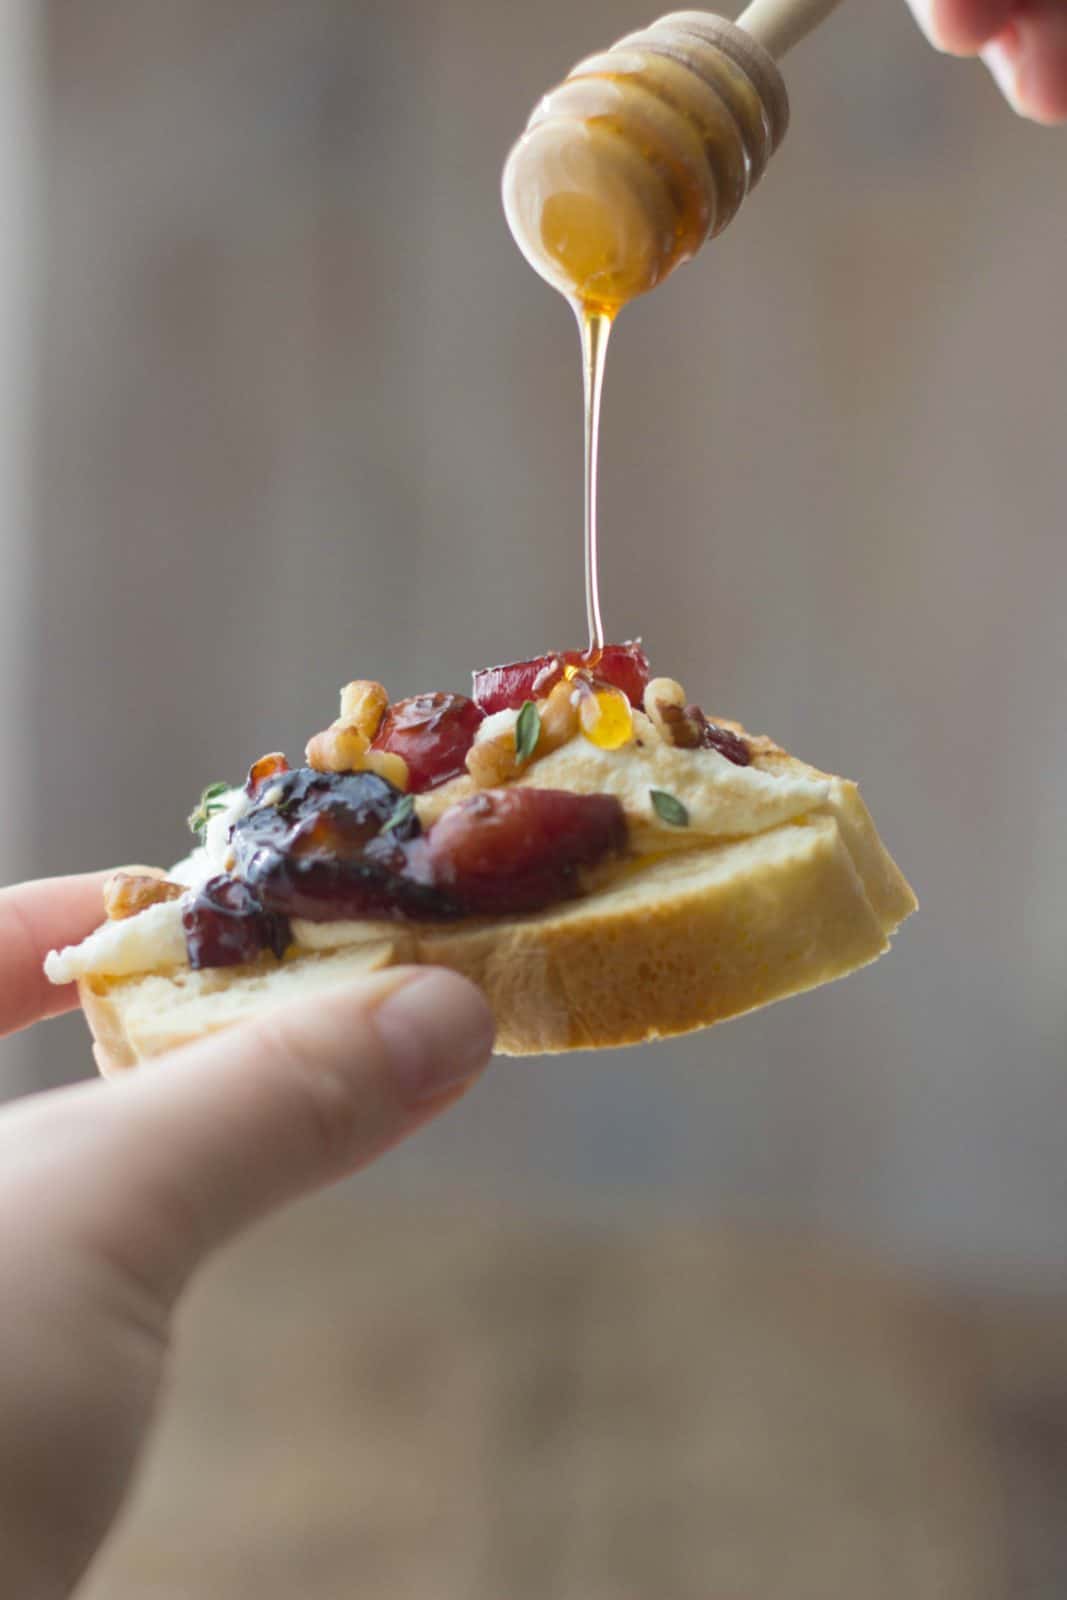 Roasted balsamic grapes & creamy lemon ricotta dip on a baguette slice with honey being drizzled on top.